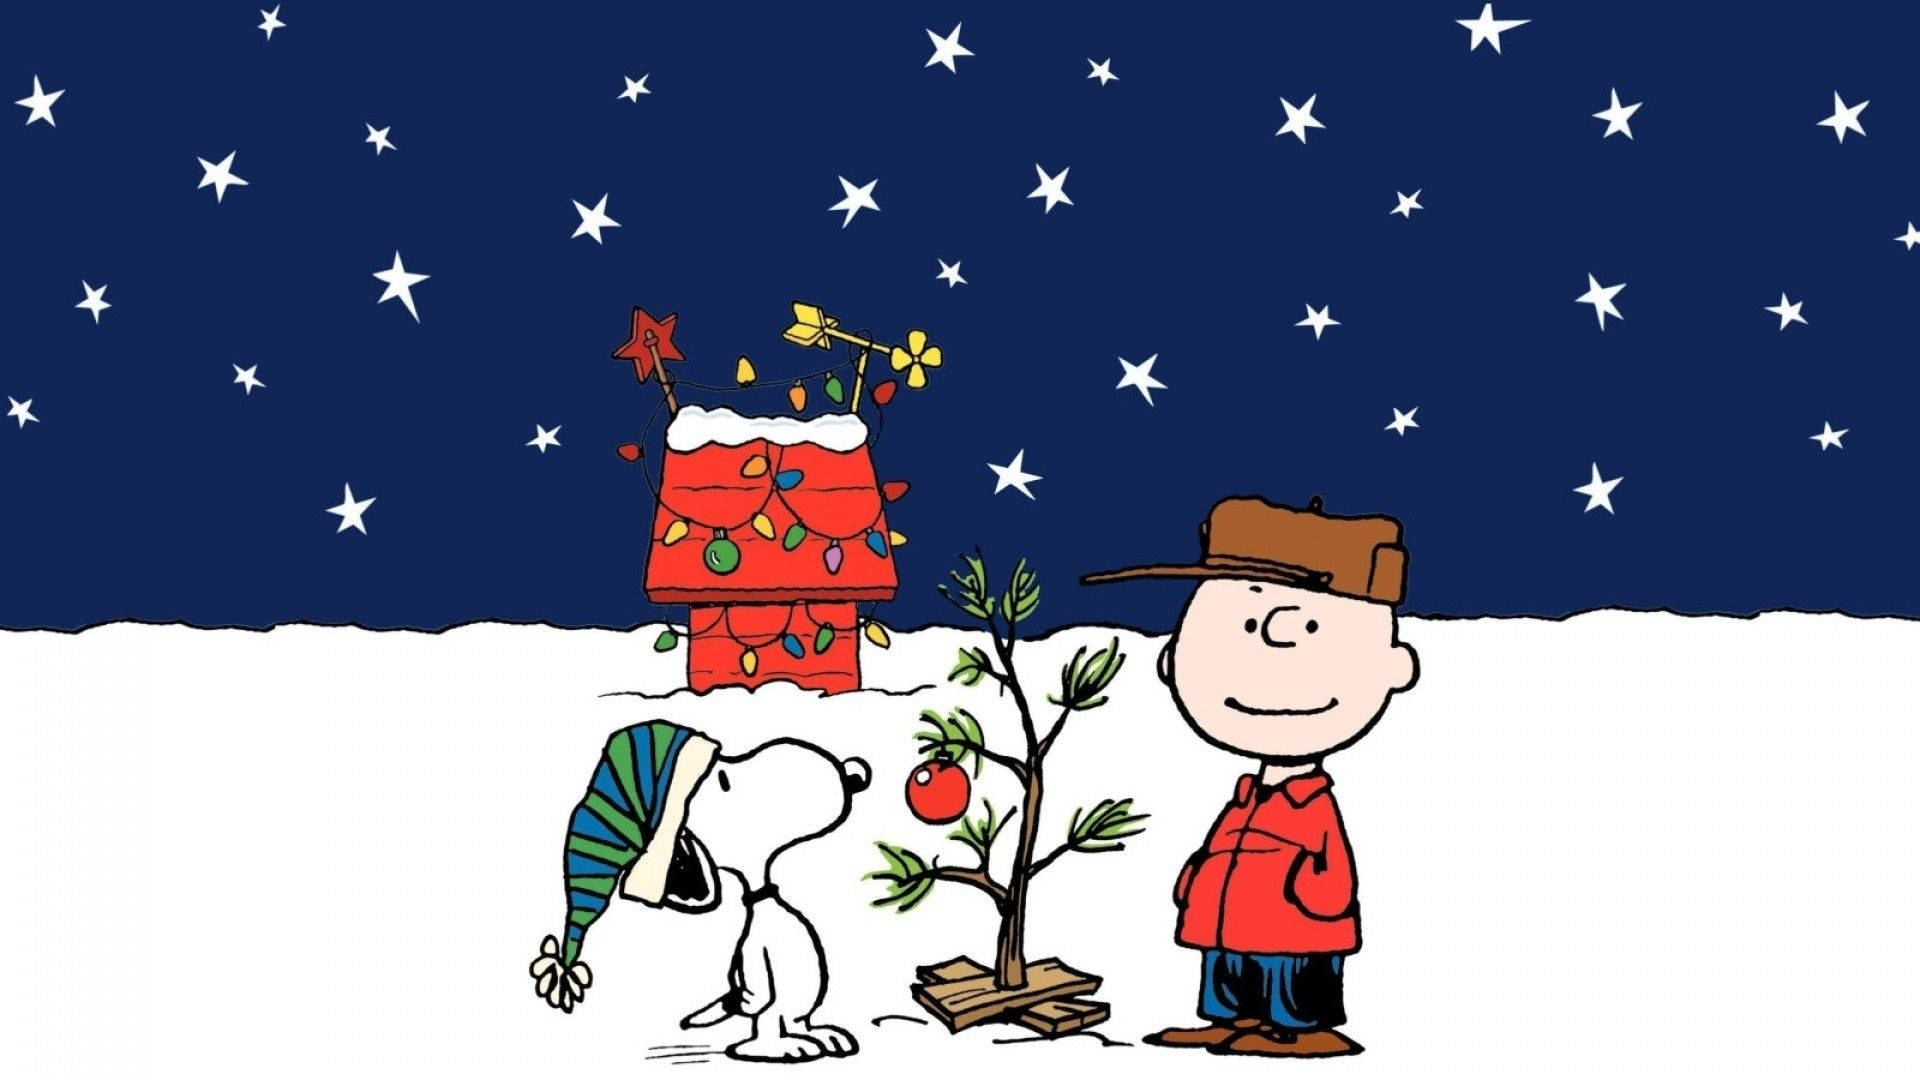 "Celebrate this Christmas holiday season with Snoopy!" Wallpaper